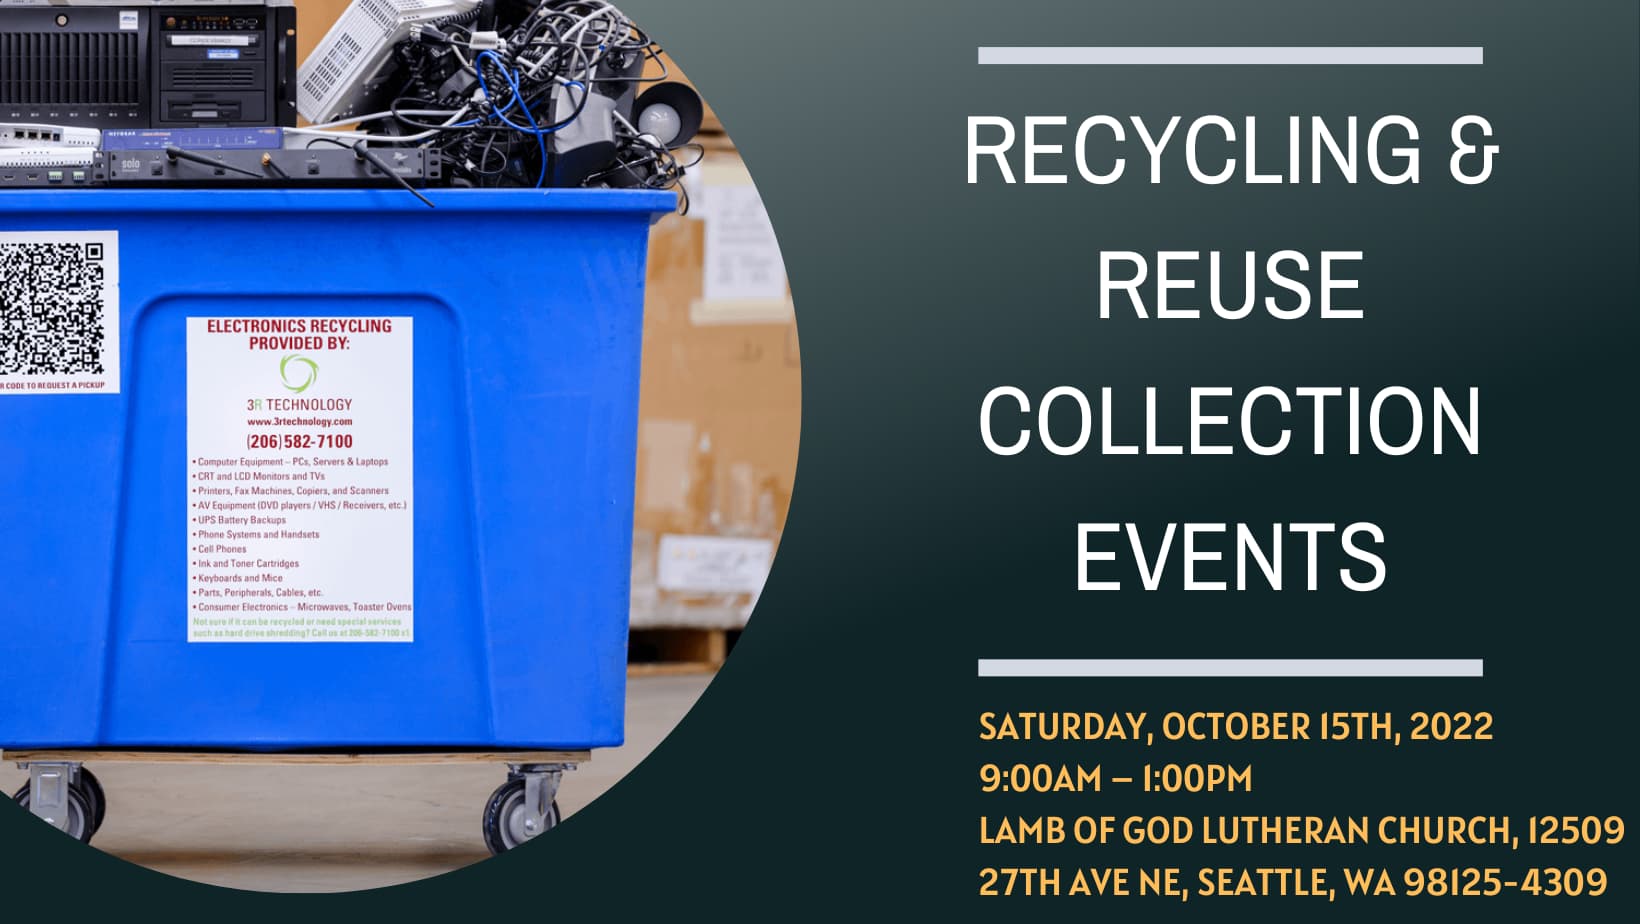 Recycling & Reuse Collection Events